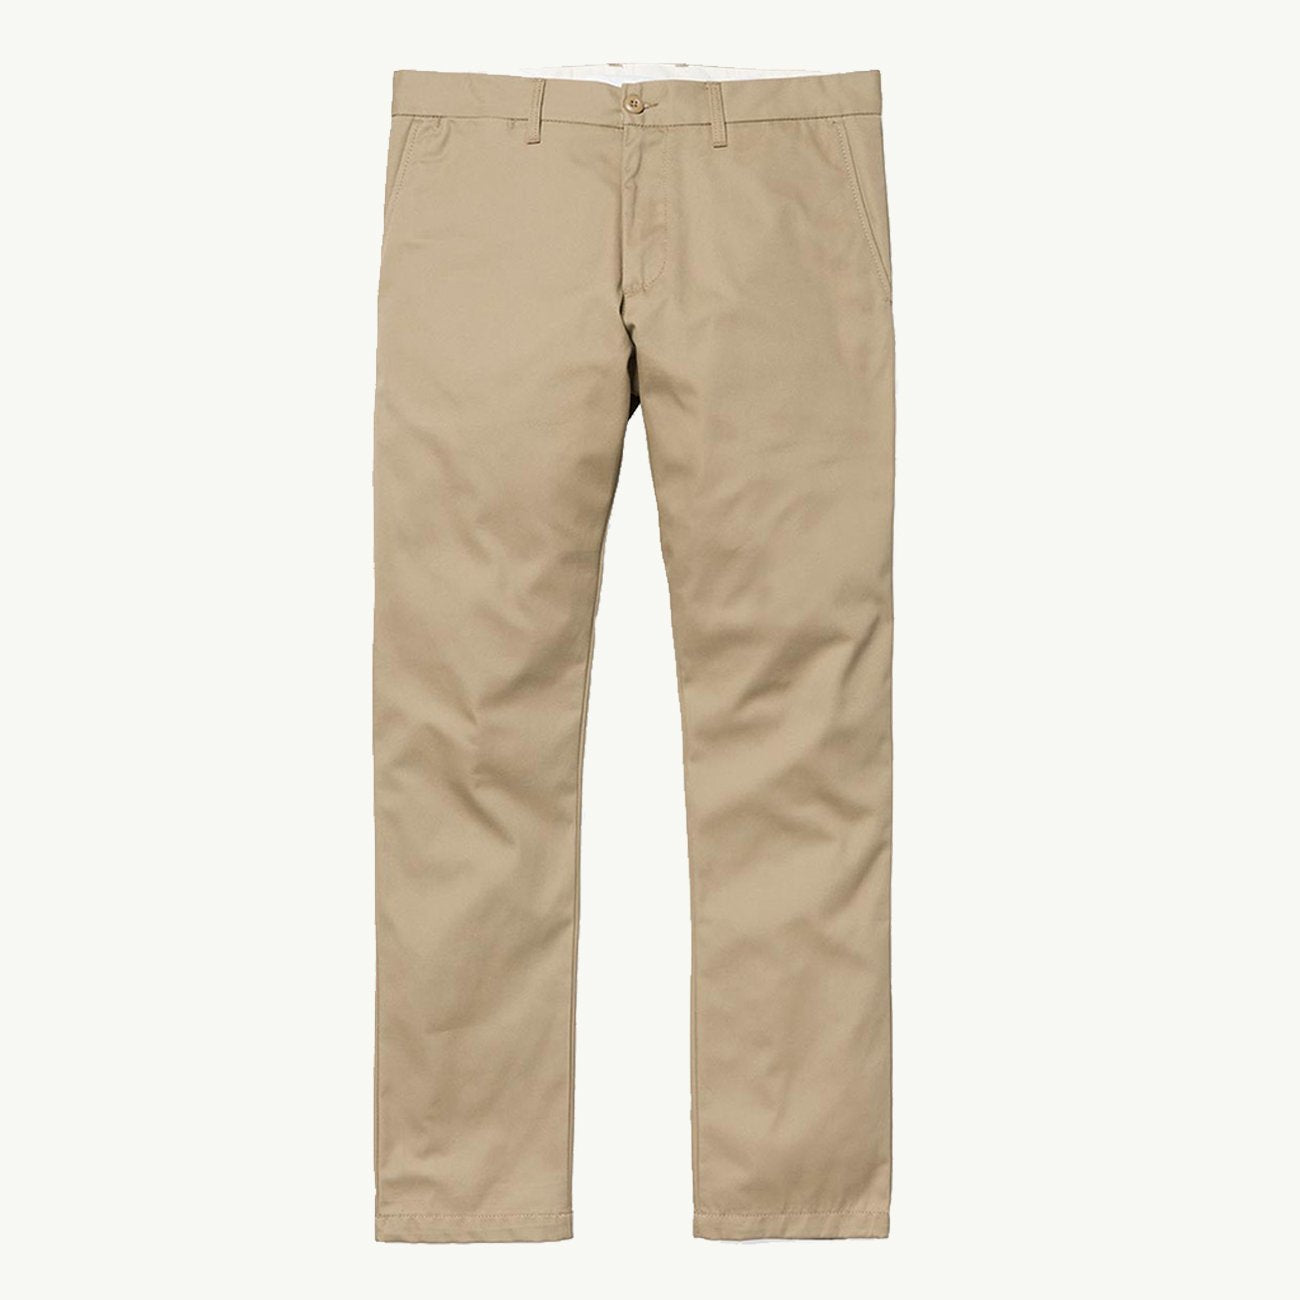 CARHARTT CLUB PANT QUESTA LEATHER RINSED